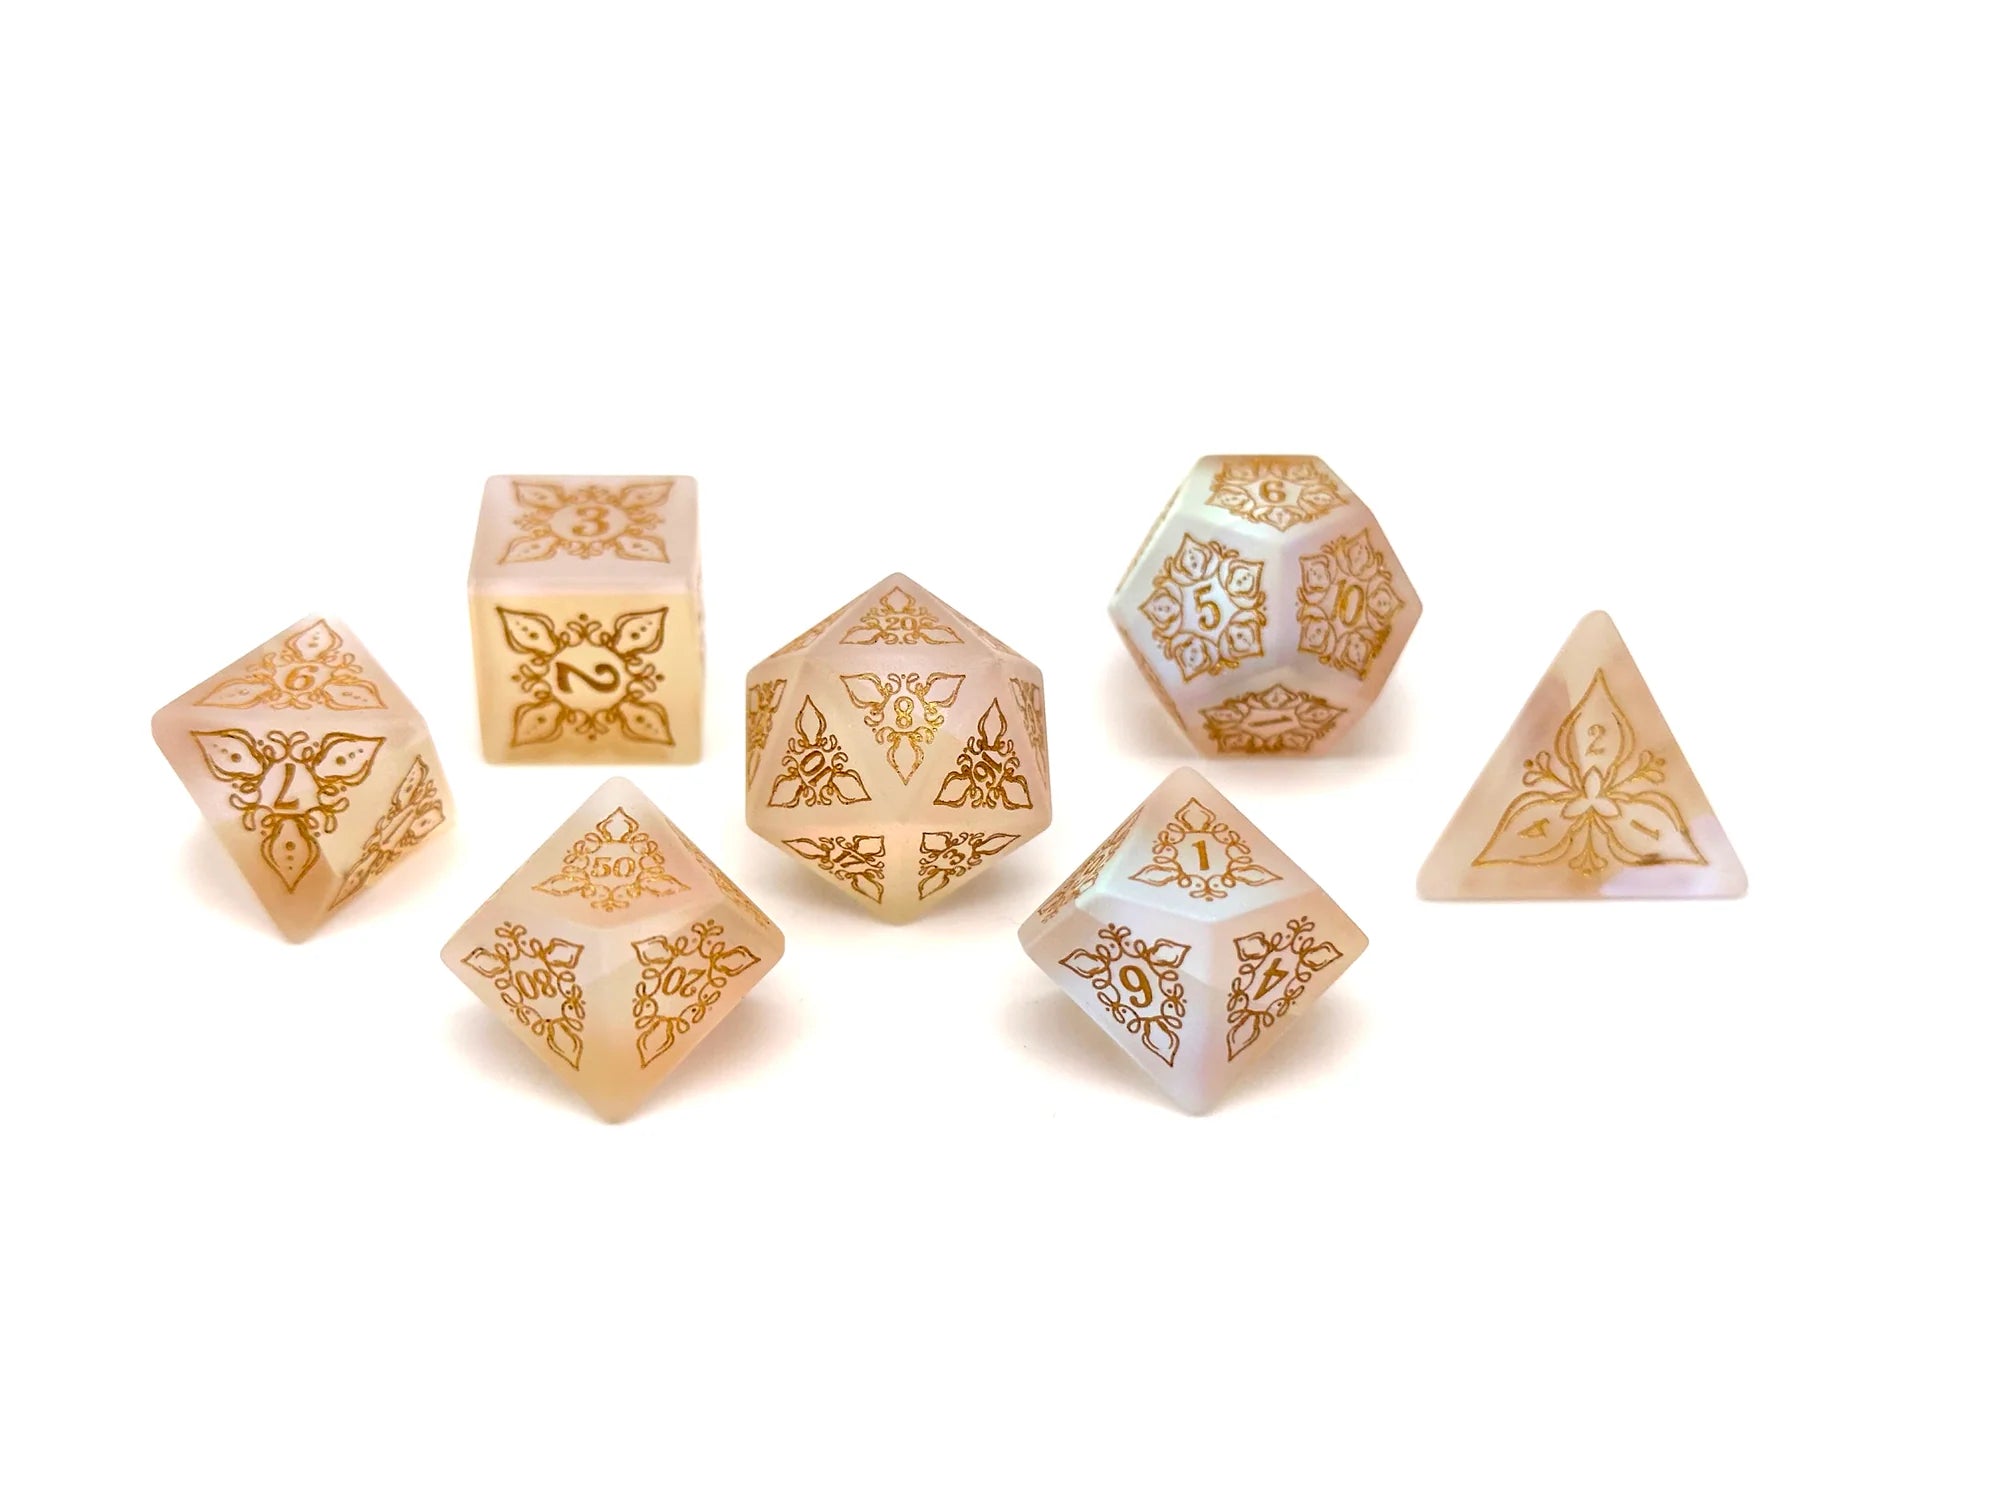 Feyweave Dice: Frosted K9 with Gold Font | Game Grid - Logan